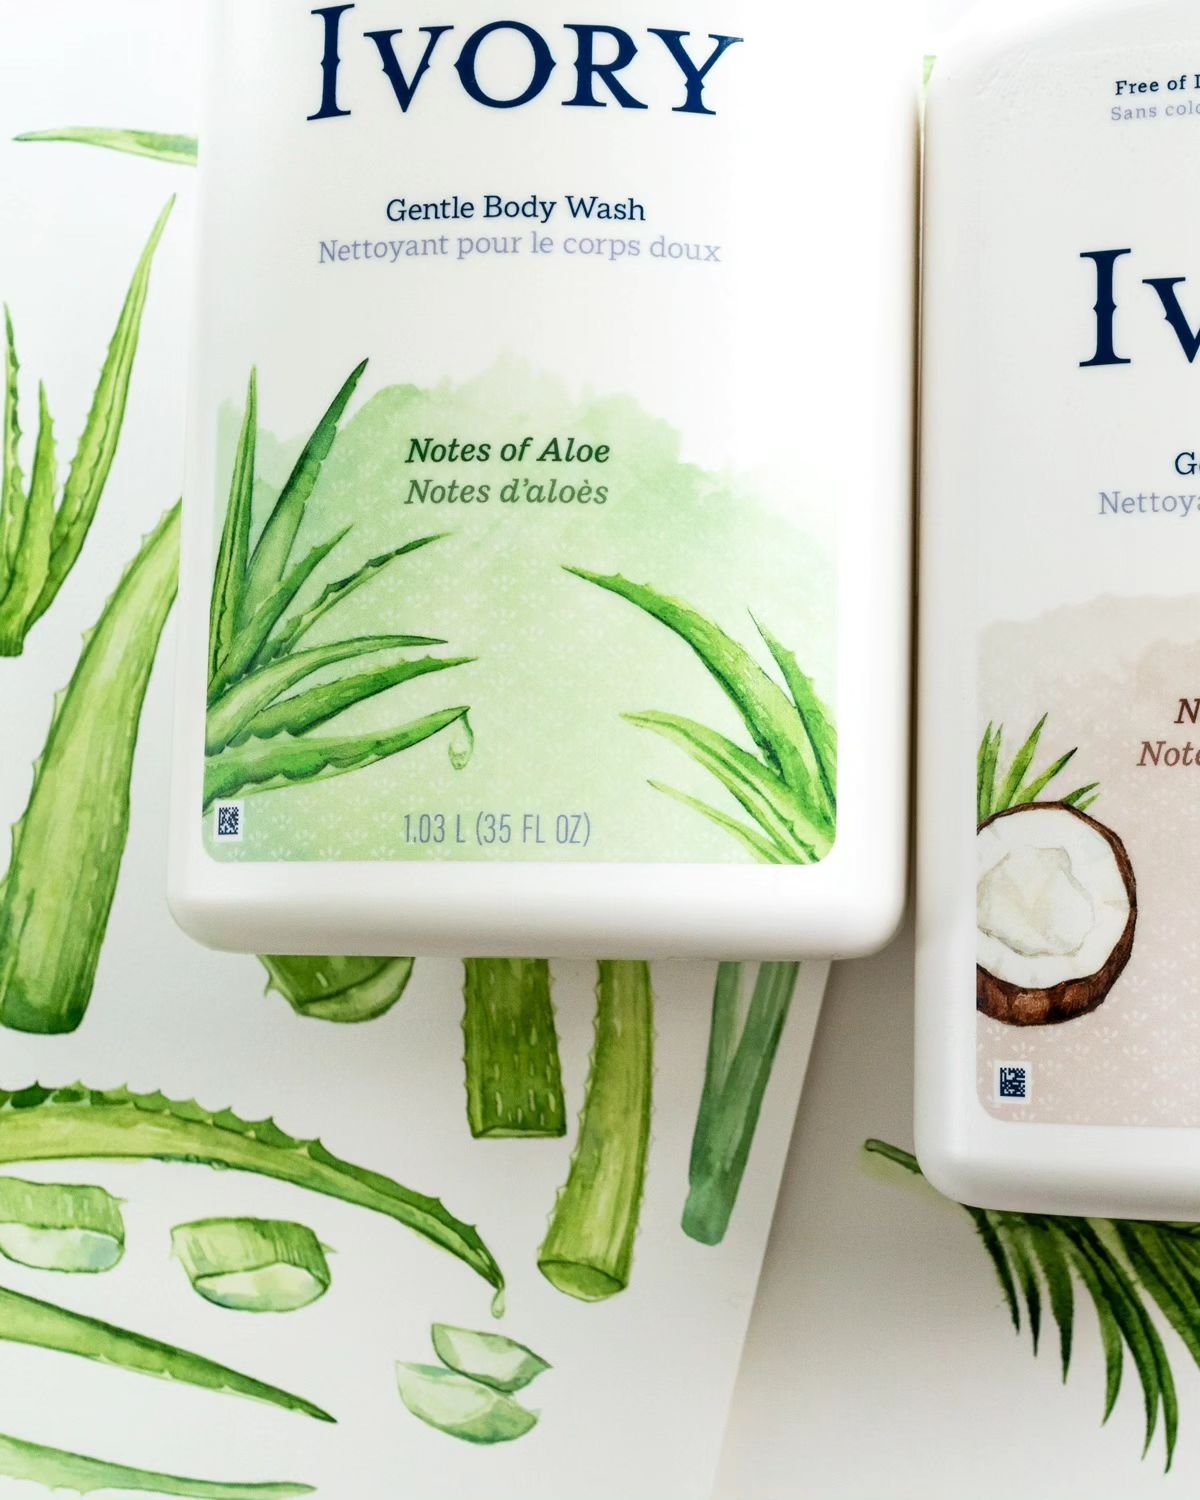 So proud to find these in stores 😍 What a gift to have the opportunity to contribute to this iconic brand 💚 

Aloe and Coconut hand-painted watercolor illustrations for Procter &amp; Gamble's Ivory brand packaging. 

#illustration #packaging #label